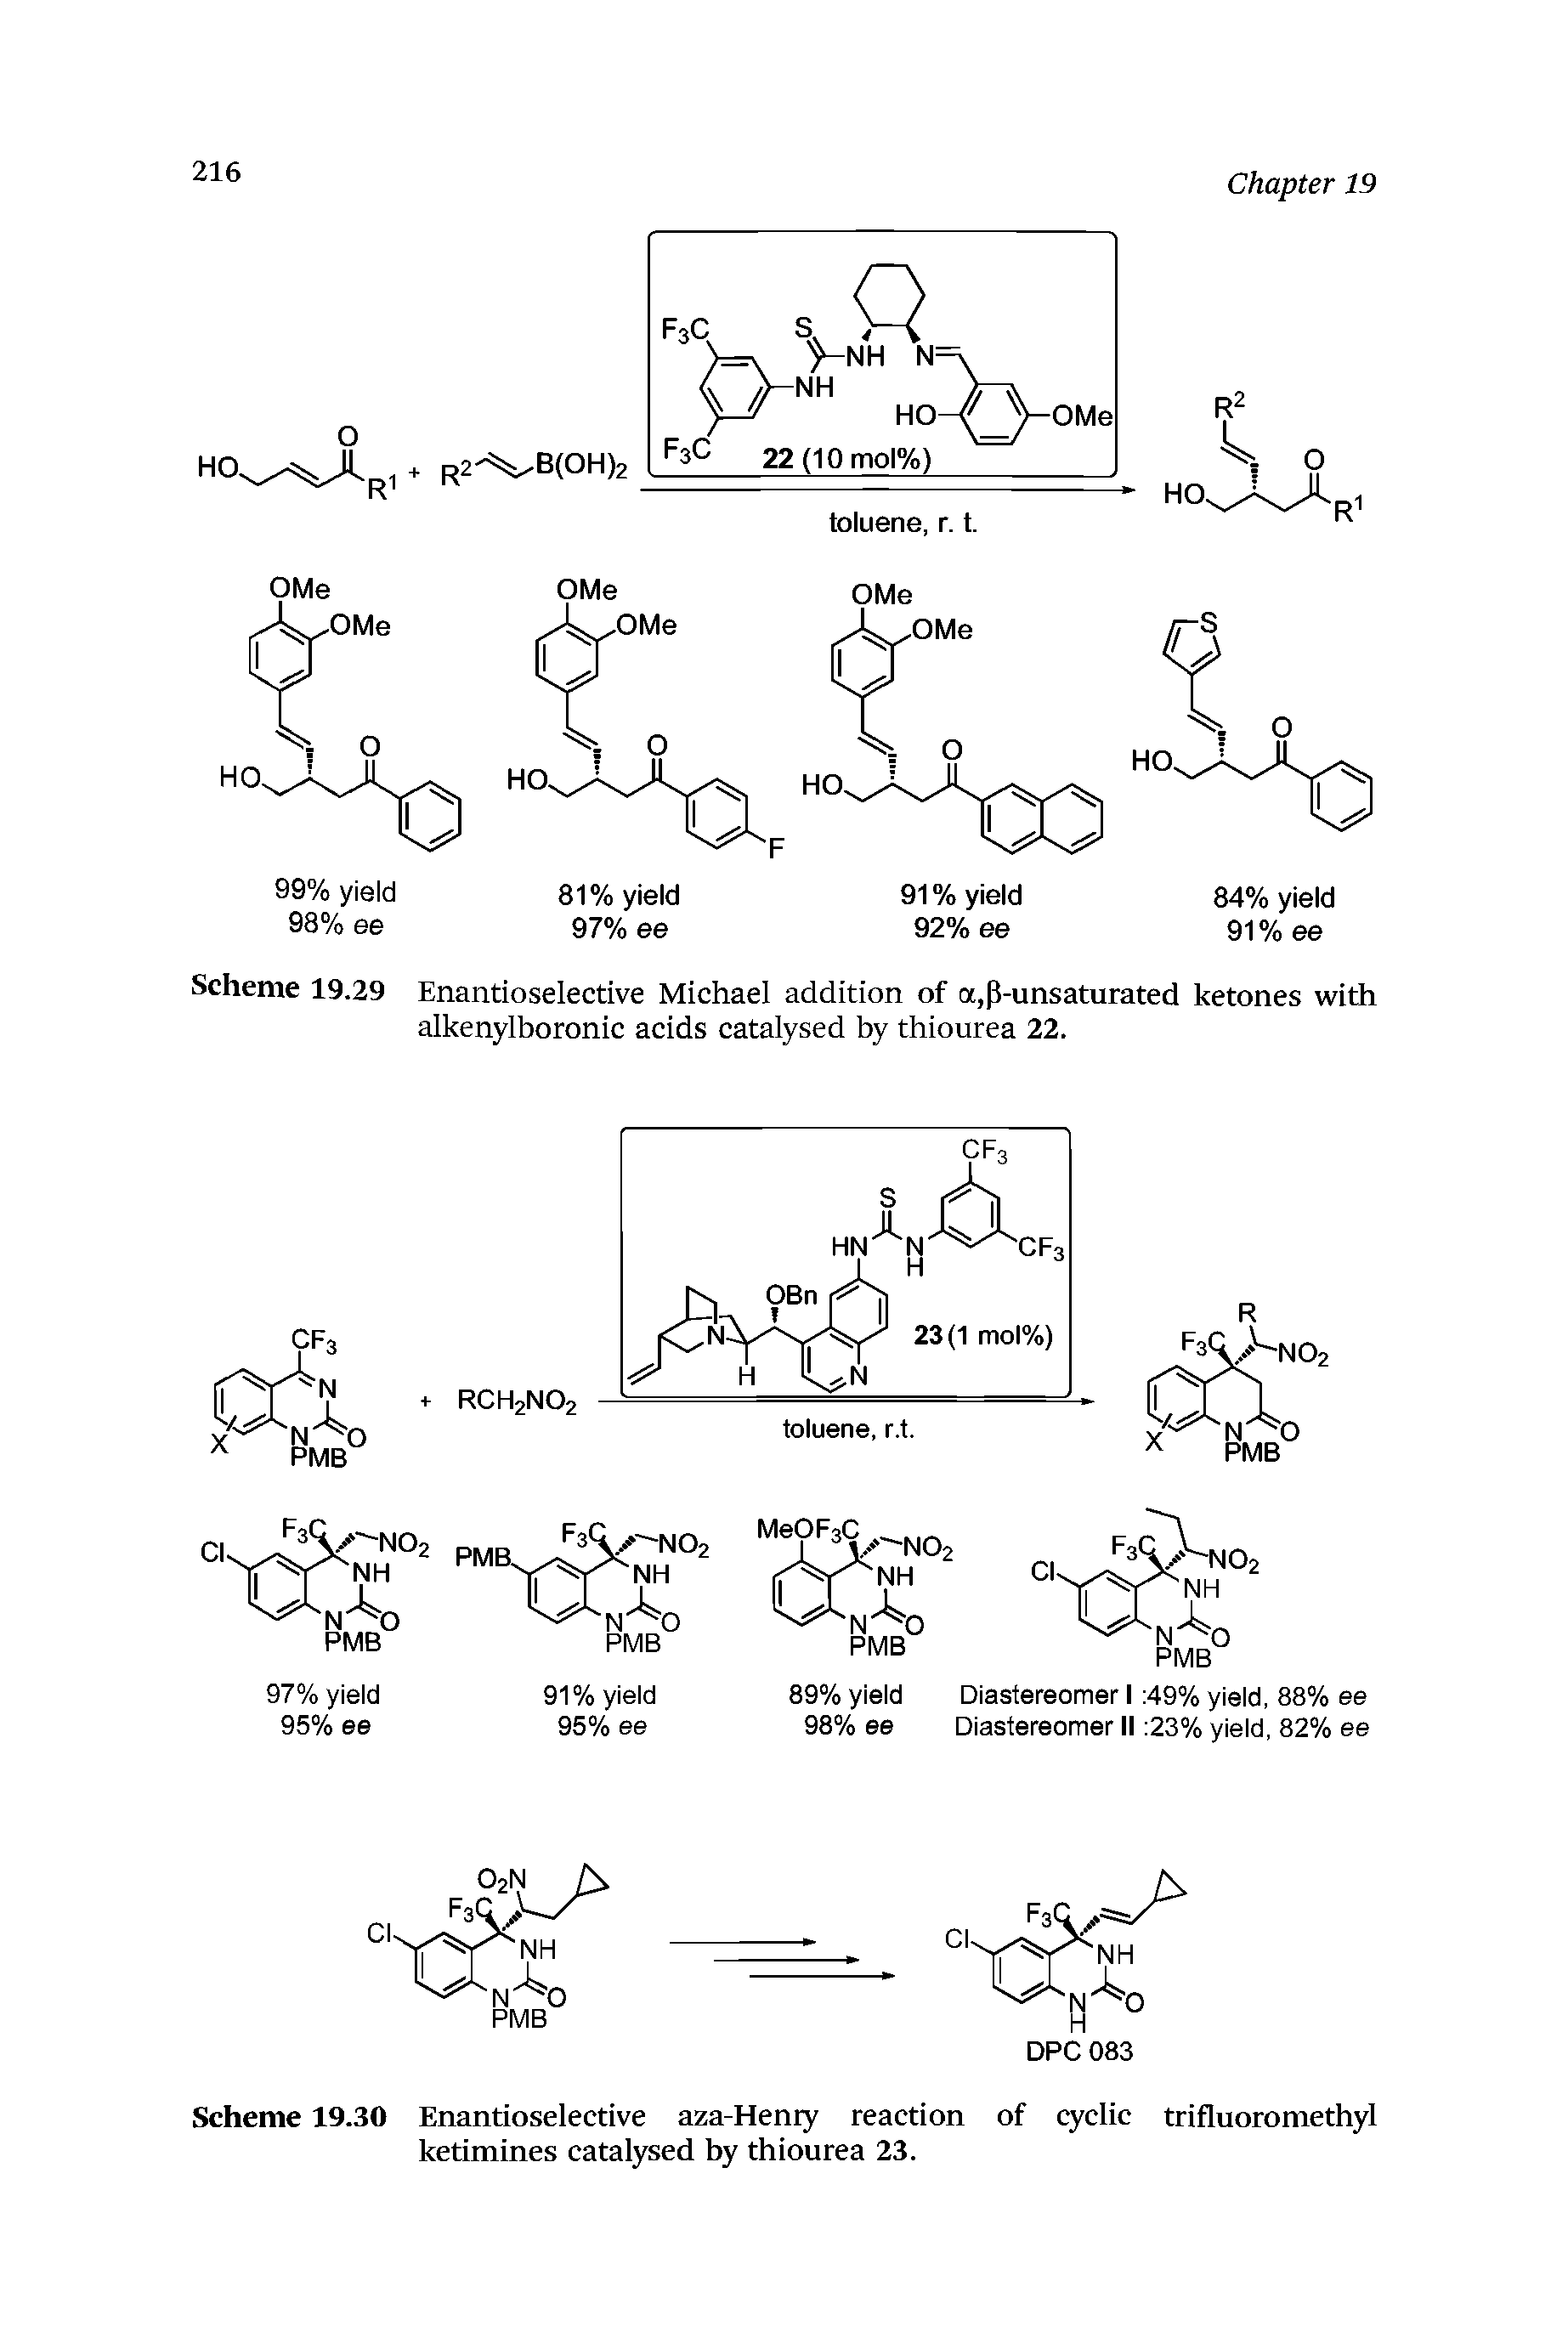 Scheme 19.29 Enantioselective Michael addition of a, B-unsaturated ketones with alkenylboronic acids catalysed by thiourea 22.